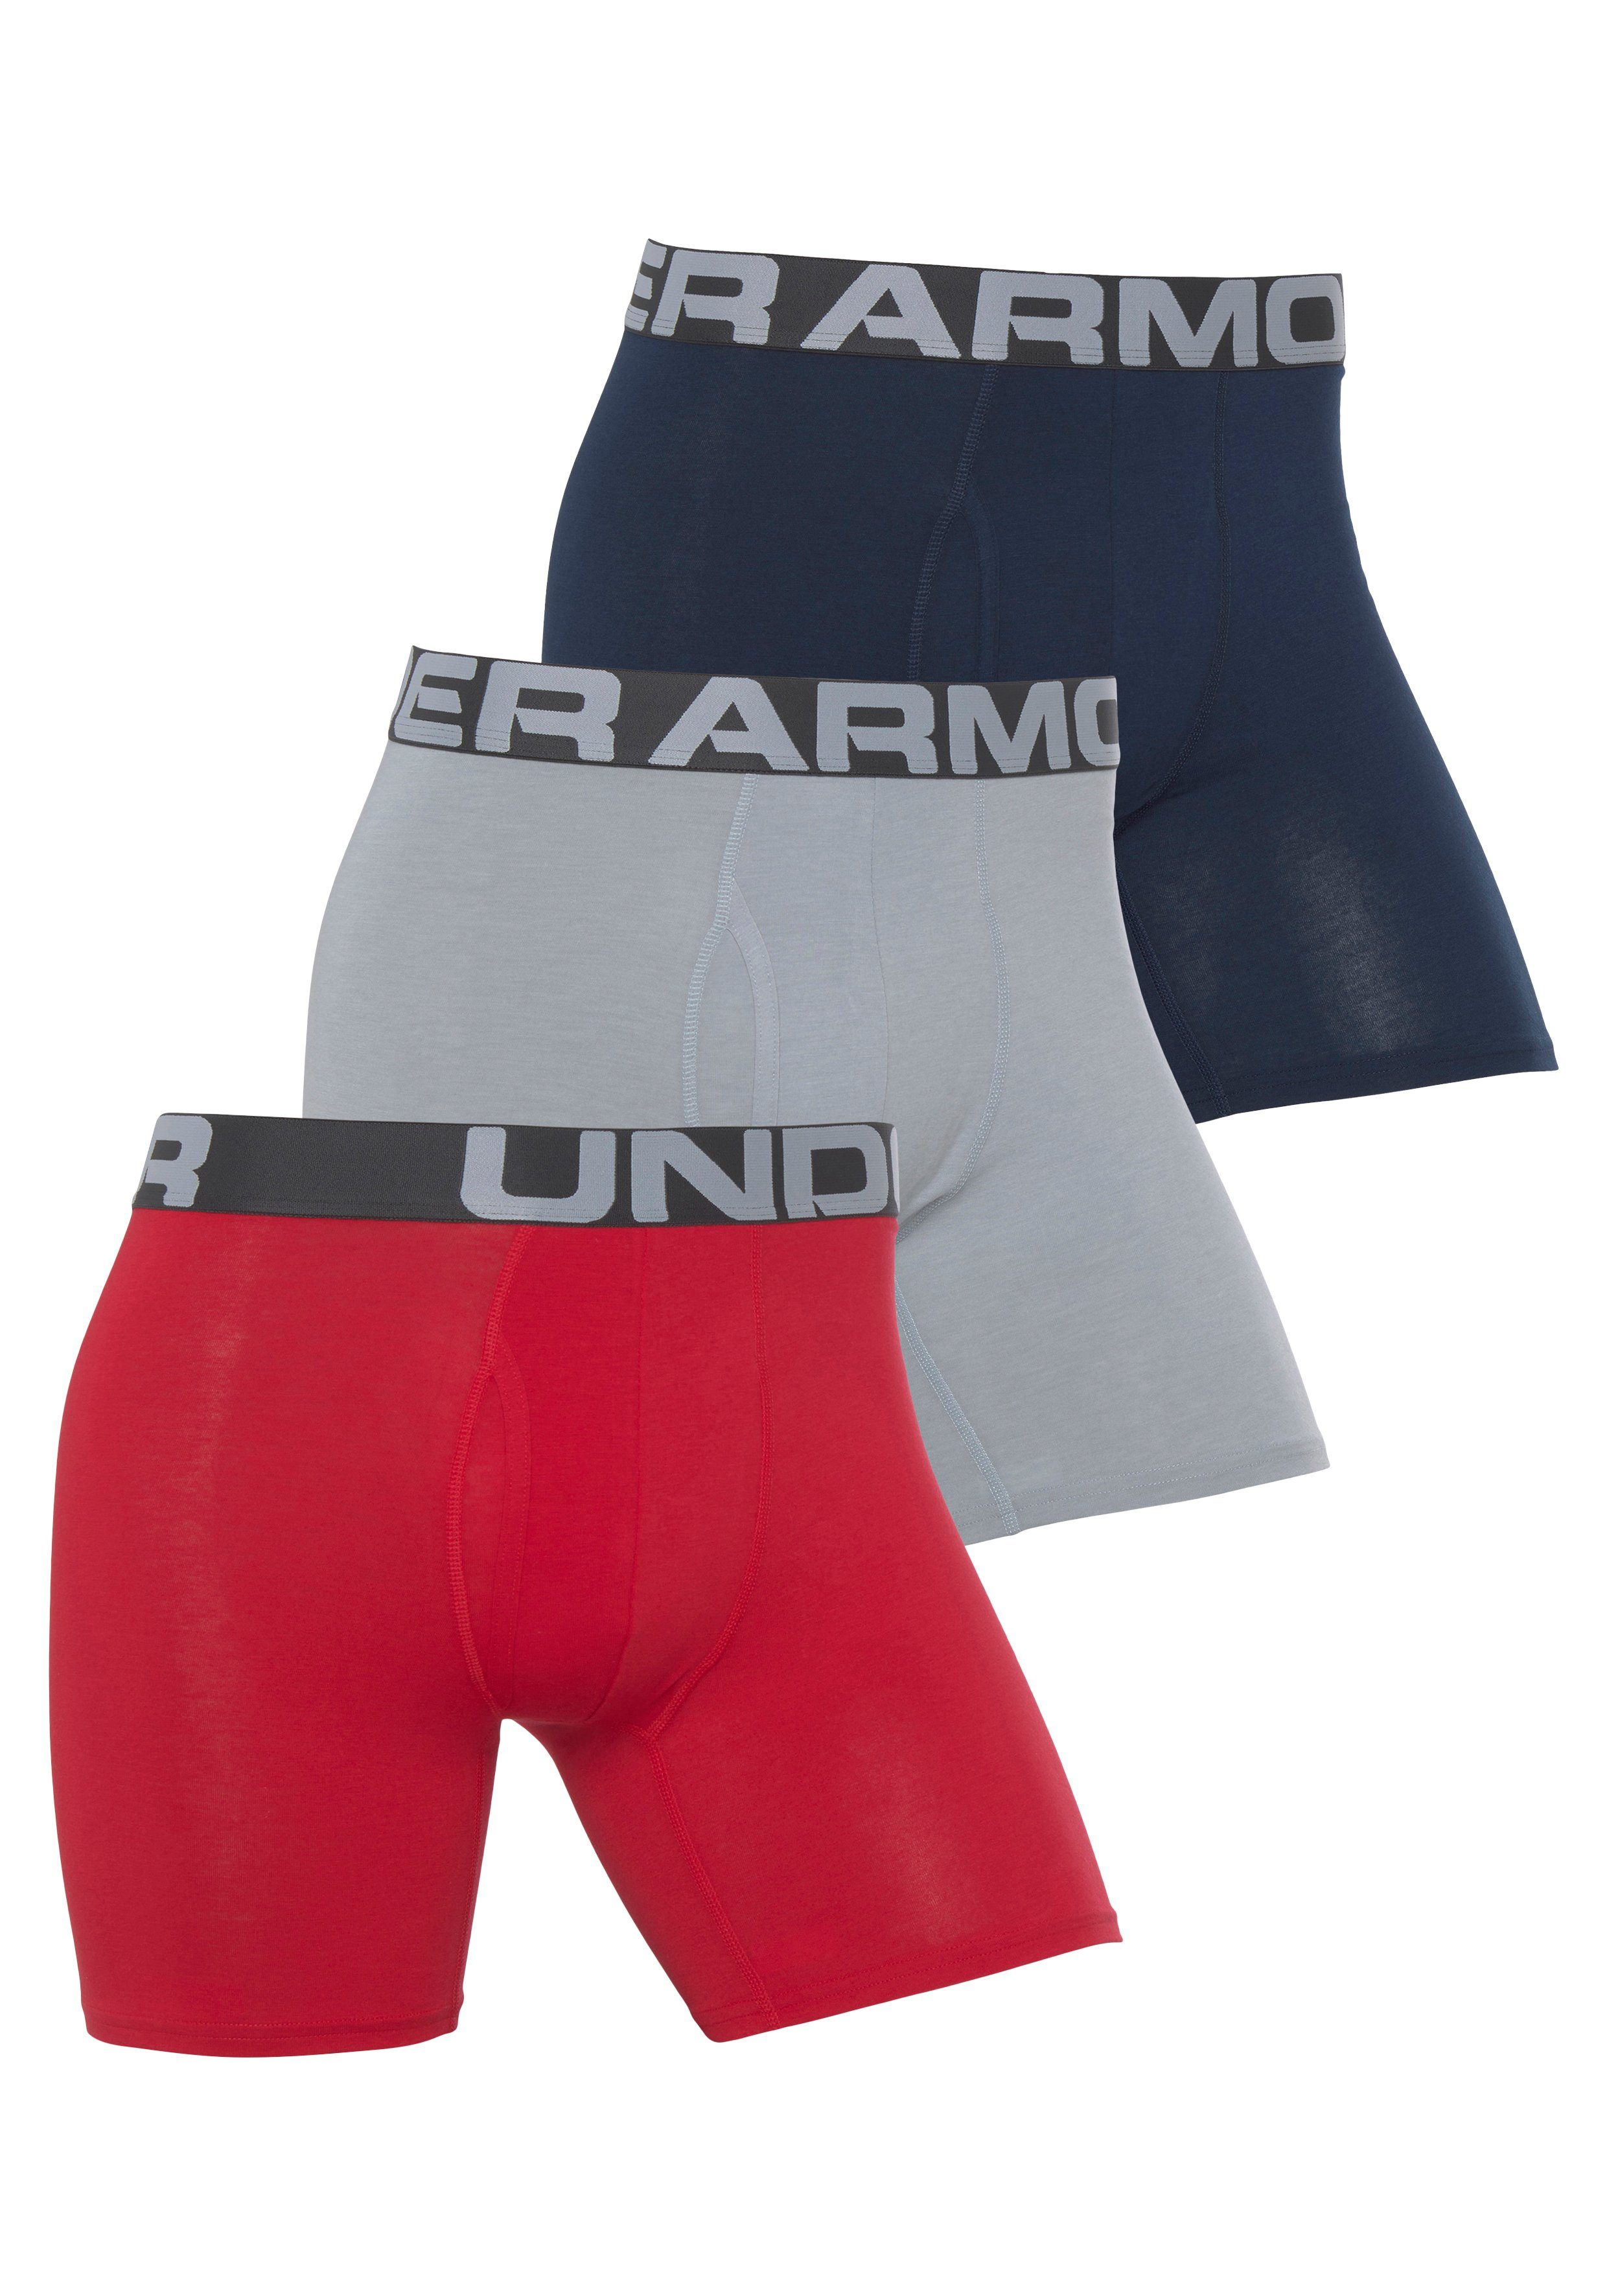 1 6 COTTON in Red 3er-Pack) PACK Armour® 3-St., Boxershorts Under 600 (Packung, CHARGED